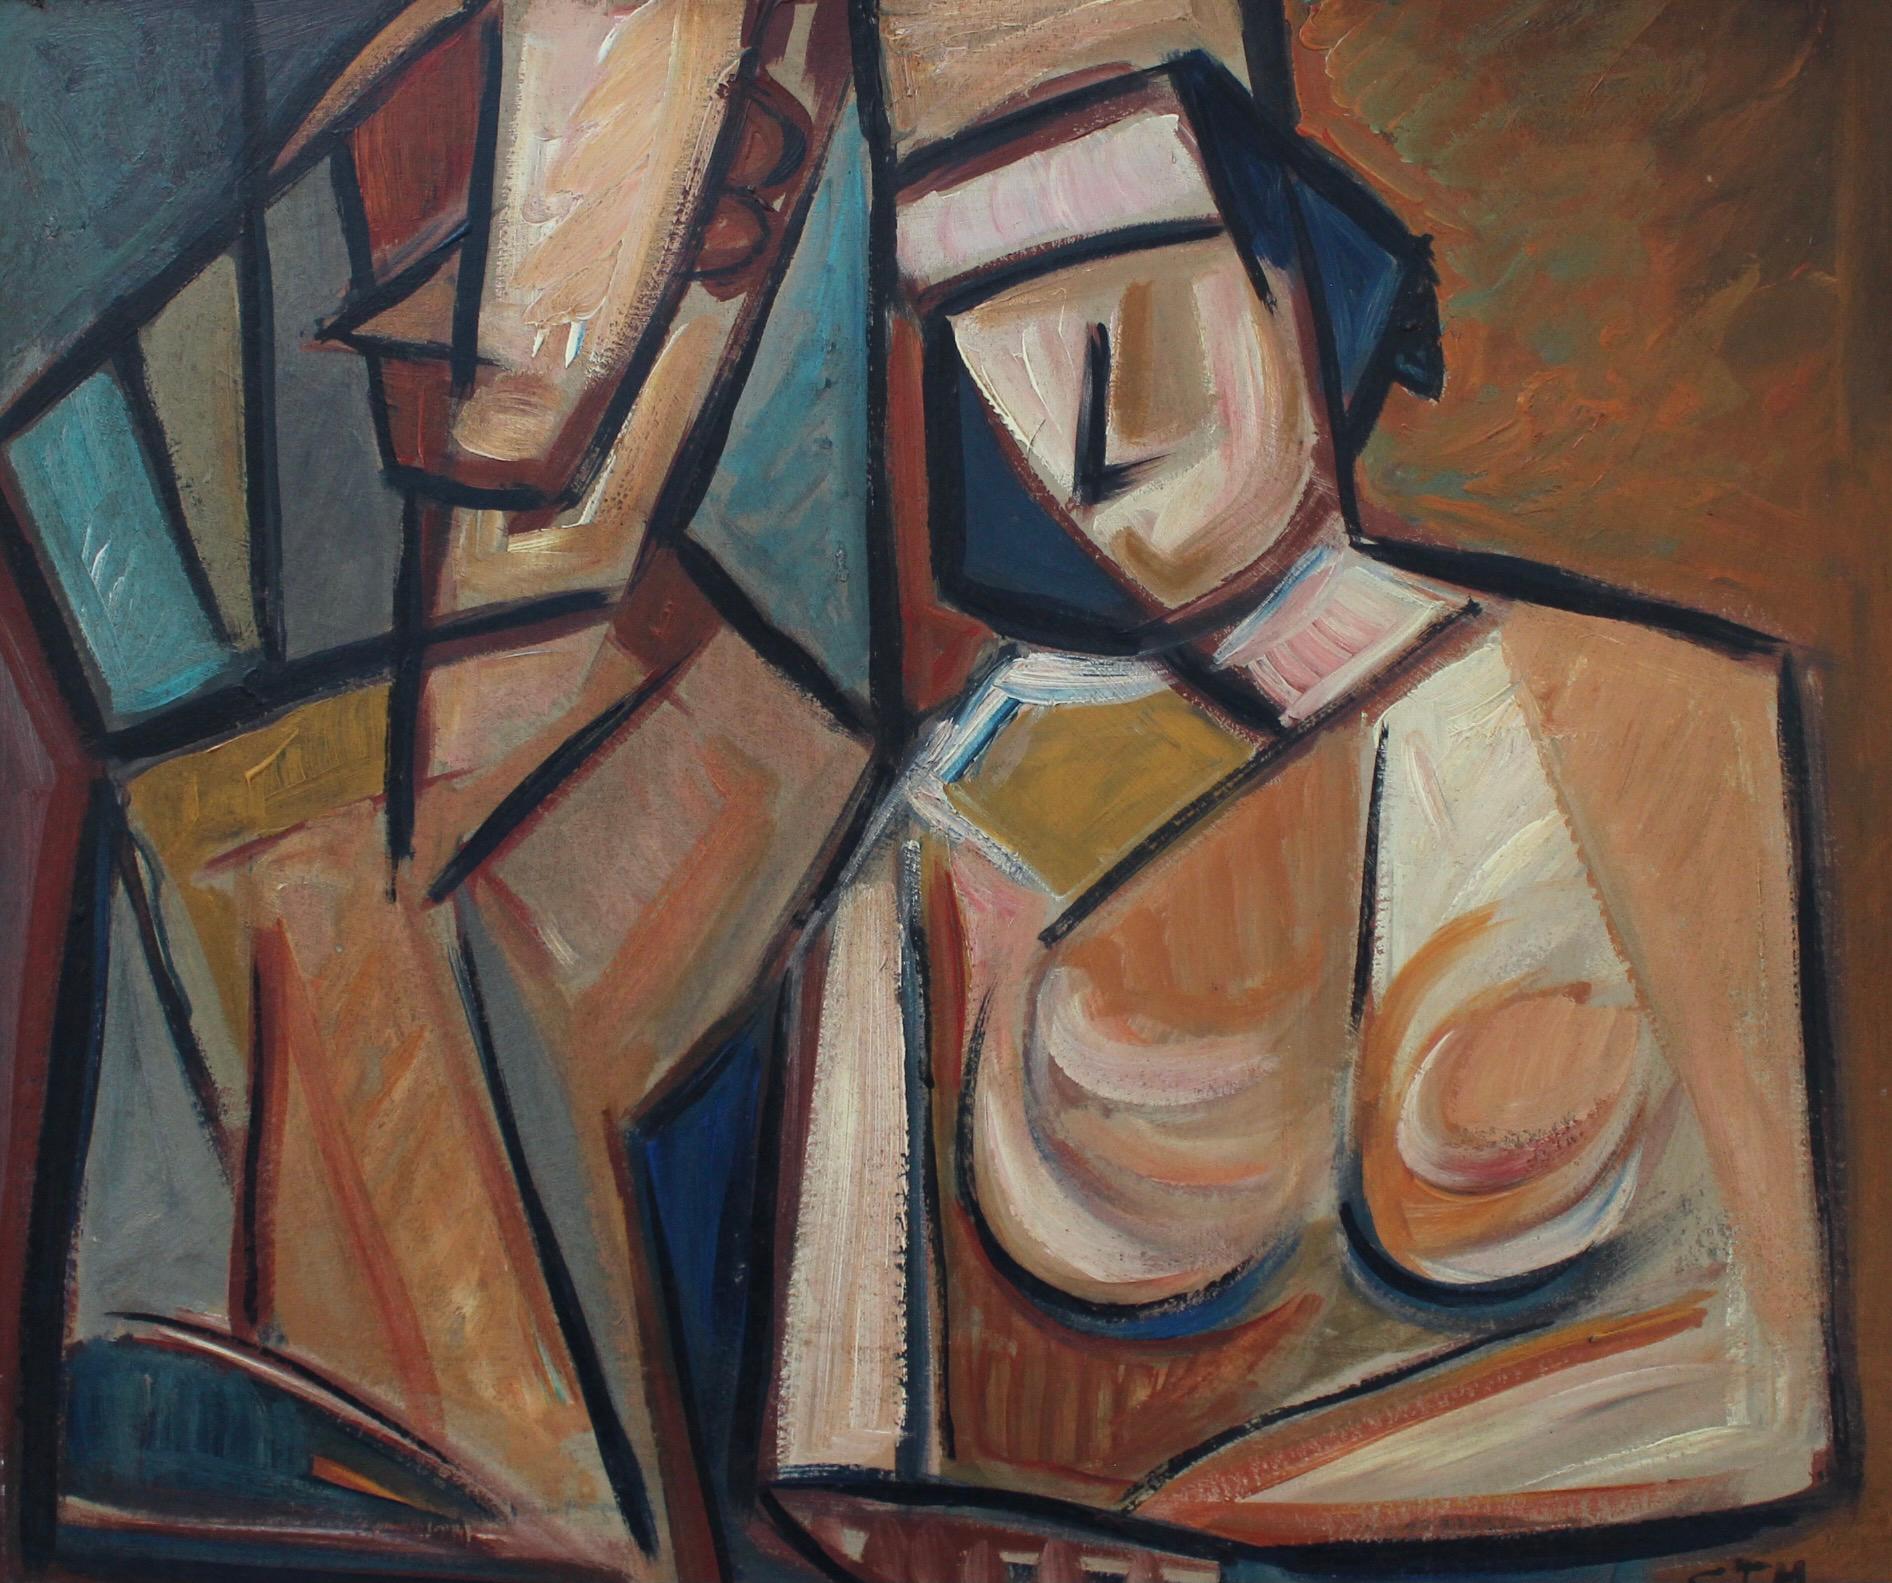 'Cubist Couple', oil on board, by STM (circa 1970s). A vibrant modern painting inspired by Picasso and Braque, the artist uses angles, lines and vibrant colours to create an entirely new dimension to painting. Cubists abandoned perspective and